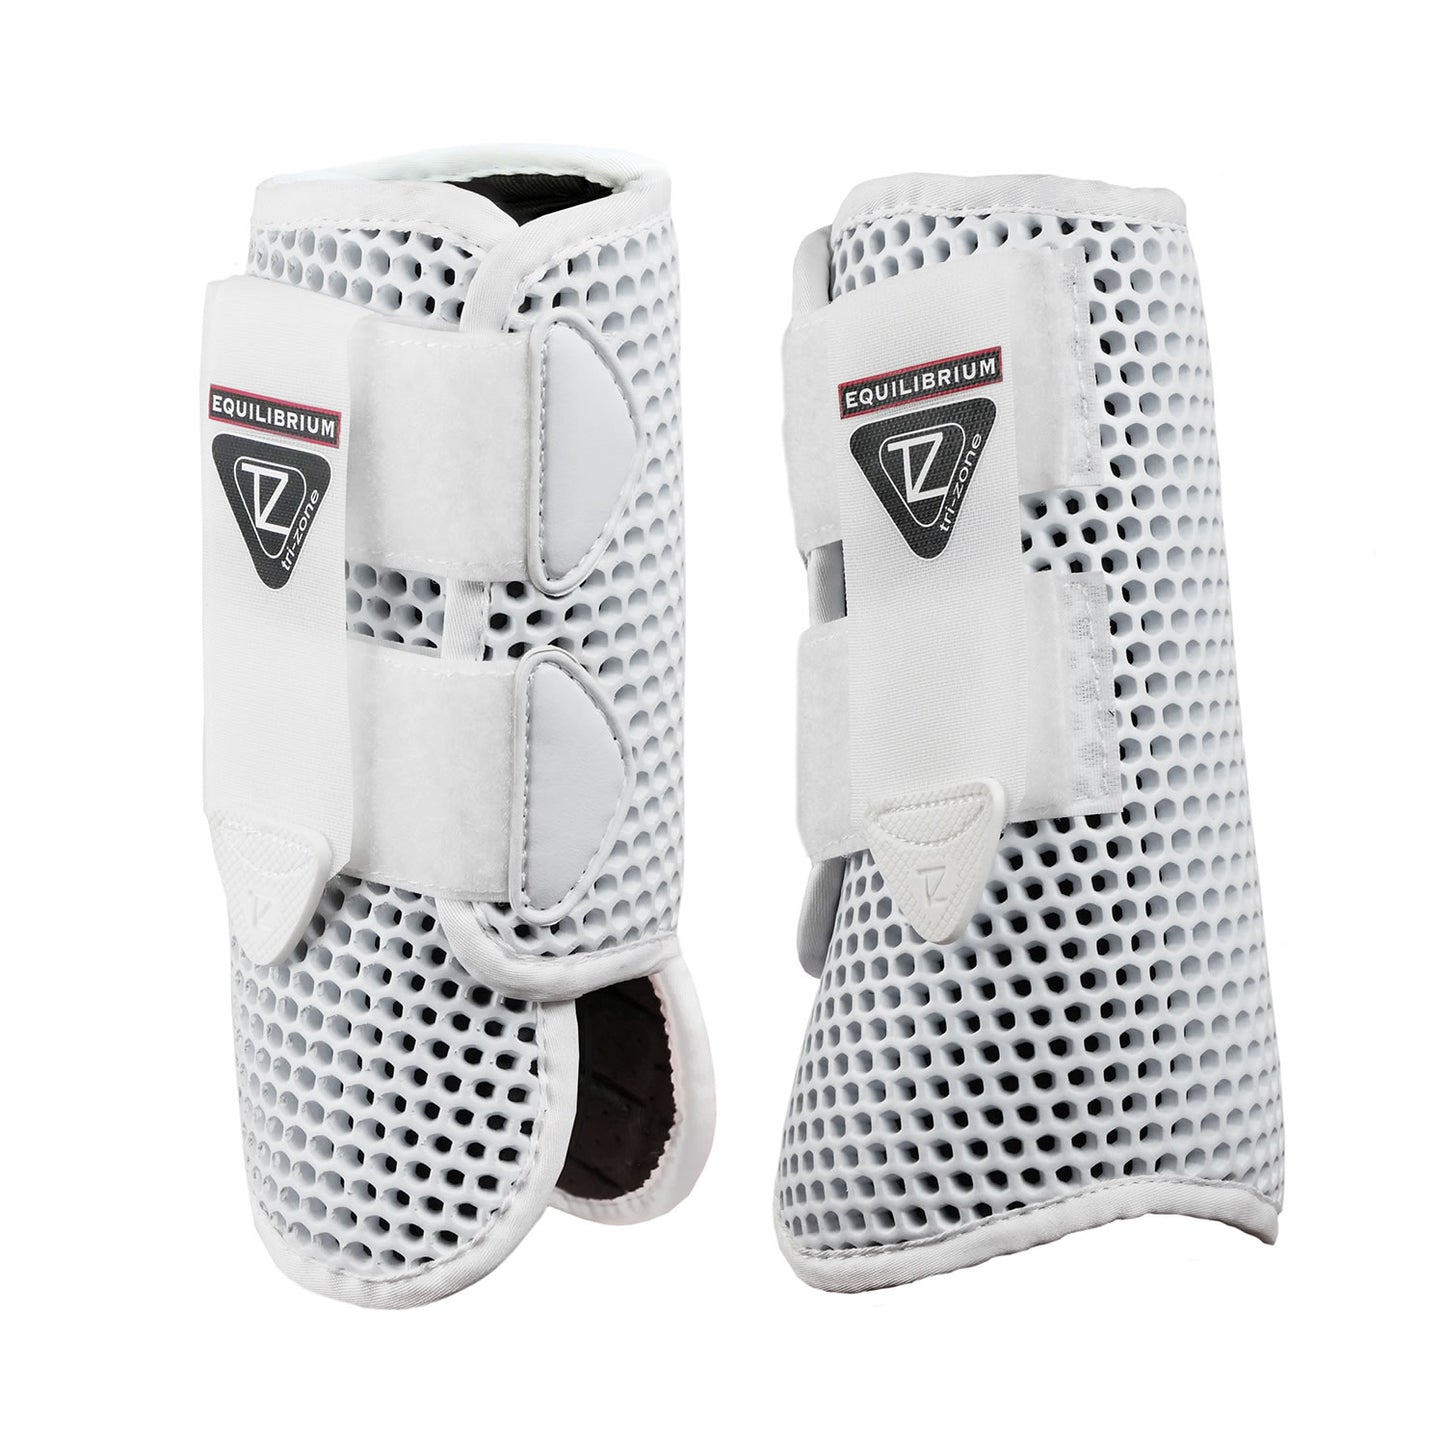 Equilibrium Tri-Zone All Sports Boots - White - Large